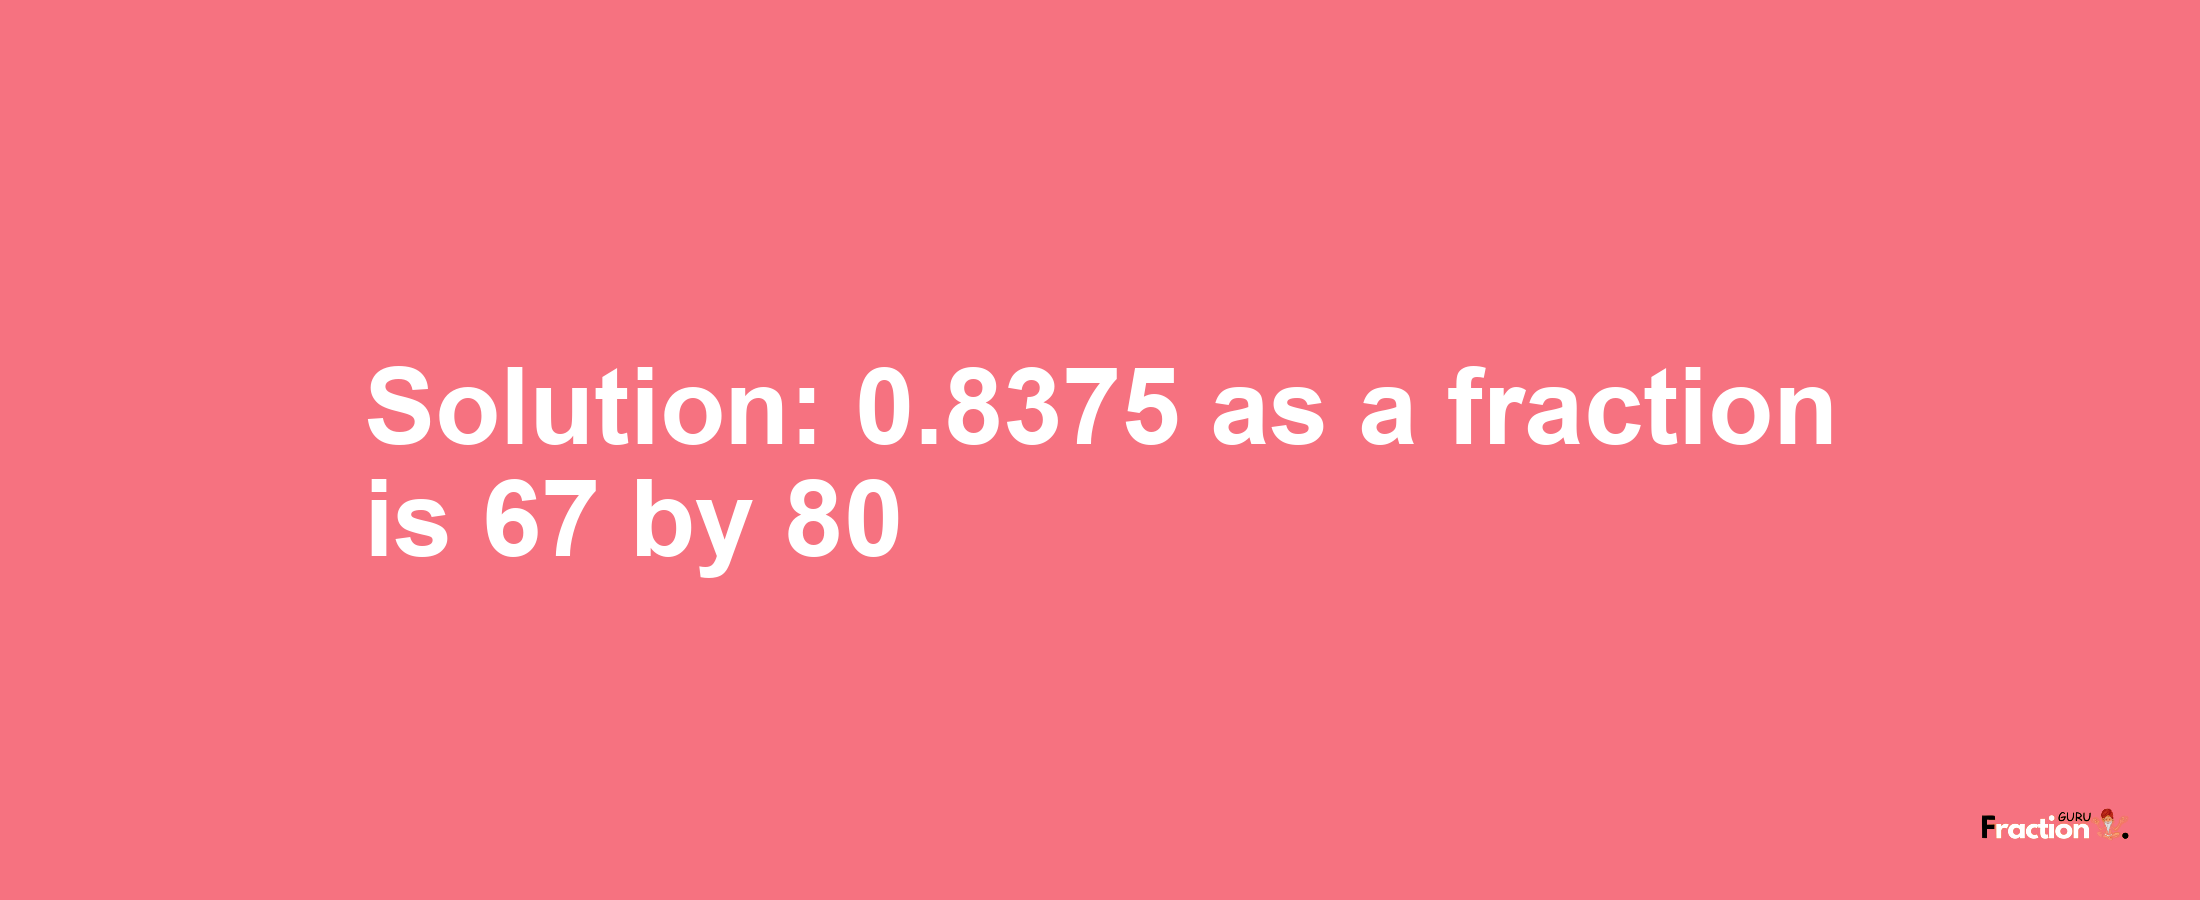 Solution:0.8375 as a fraction is 67/80